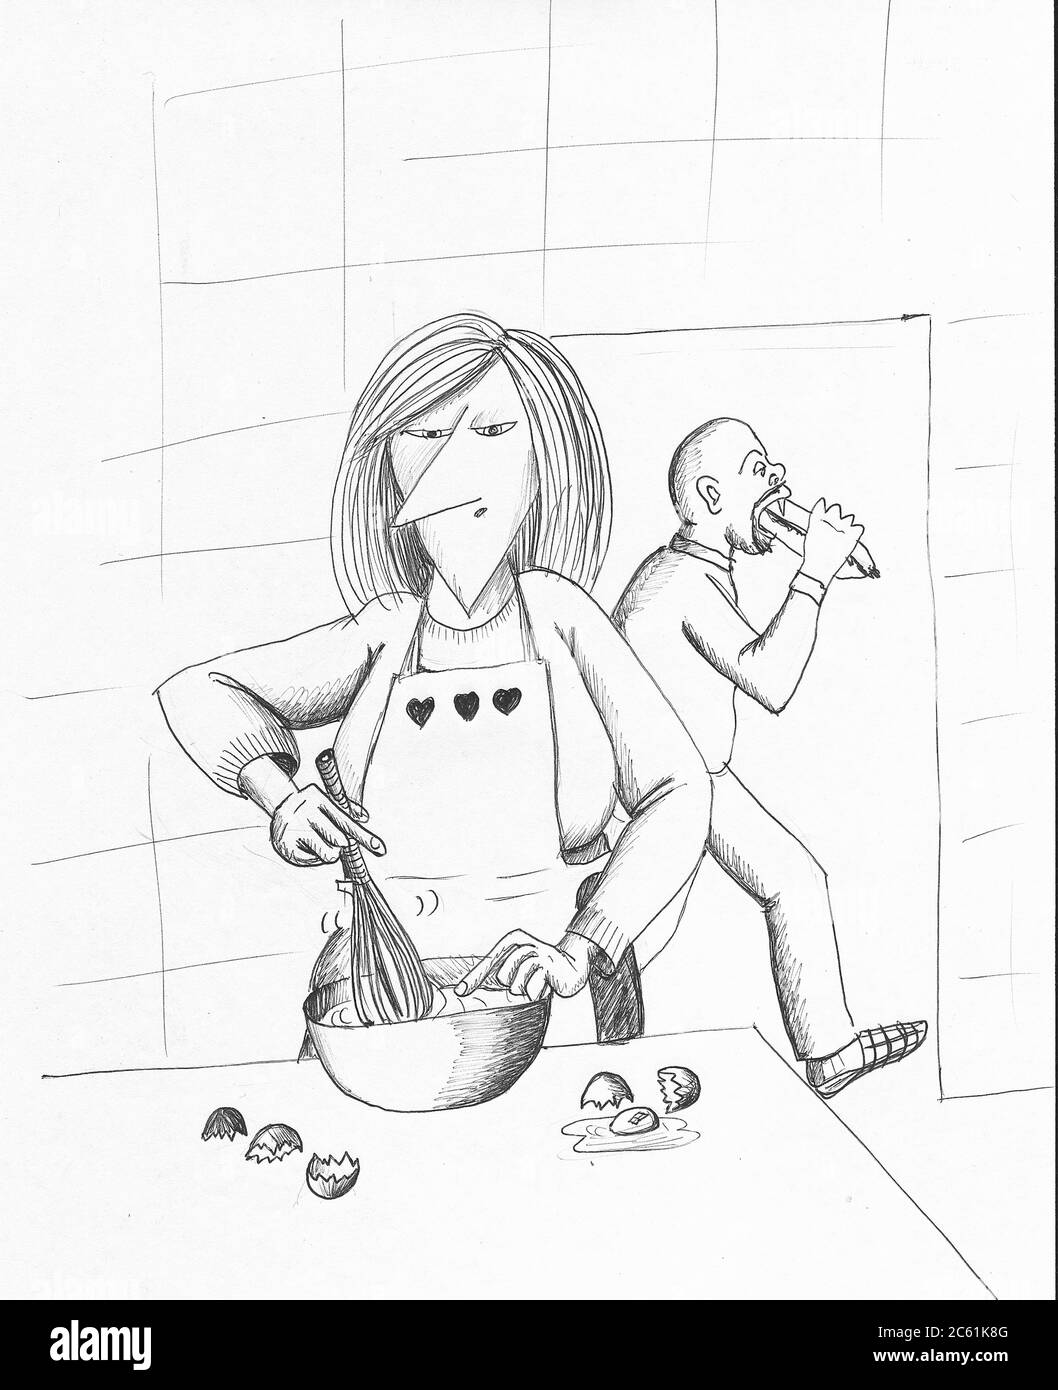 Woman in the kitchen, beating eggs and her husband eating a big sandwich. Illustration. Stock Photo